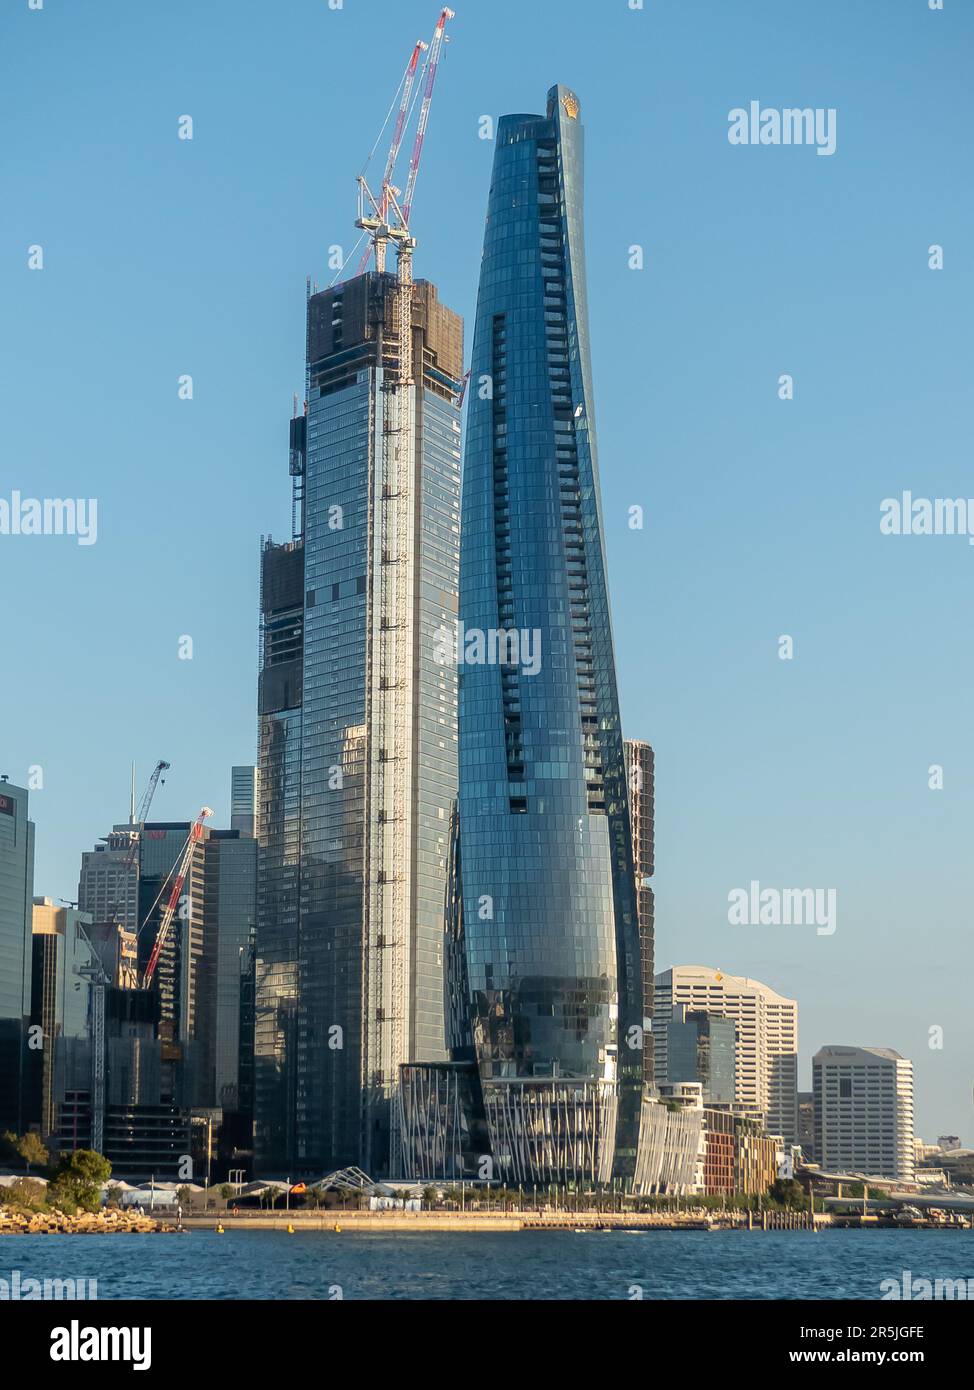 The Sydney skyline including the tallest building in Sydney, the Crown Sydney (also referred to as One Barangaroo) hotel and apartment tower block. Stock Photo